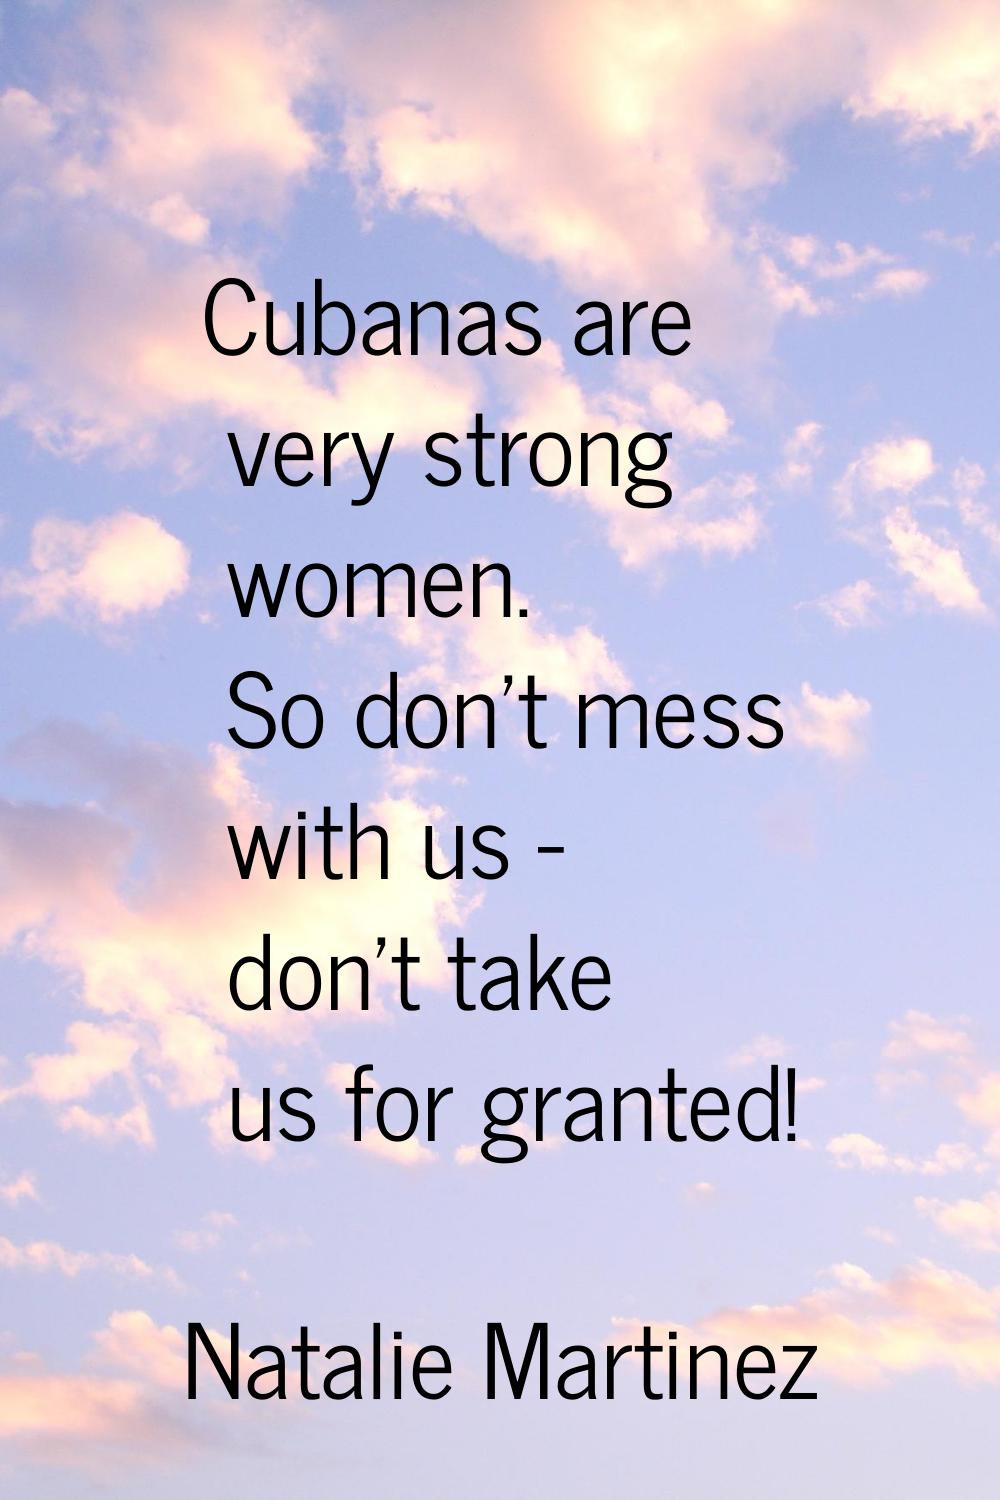 Cubanas are very strong women. So don't mess with us - don't take us for granted!